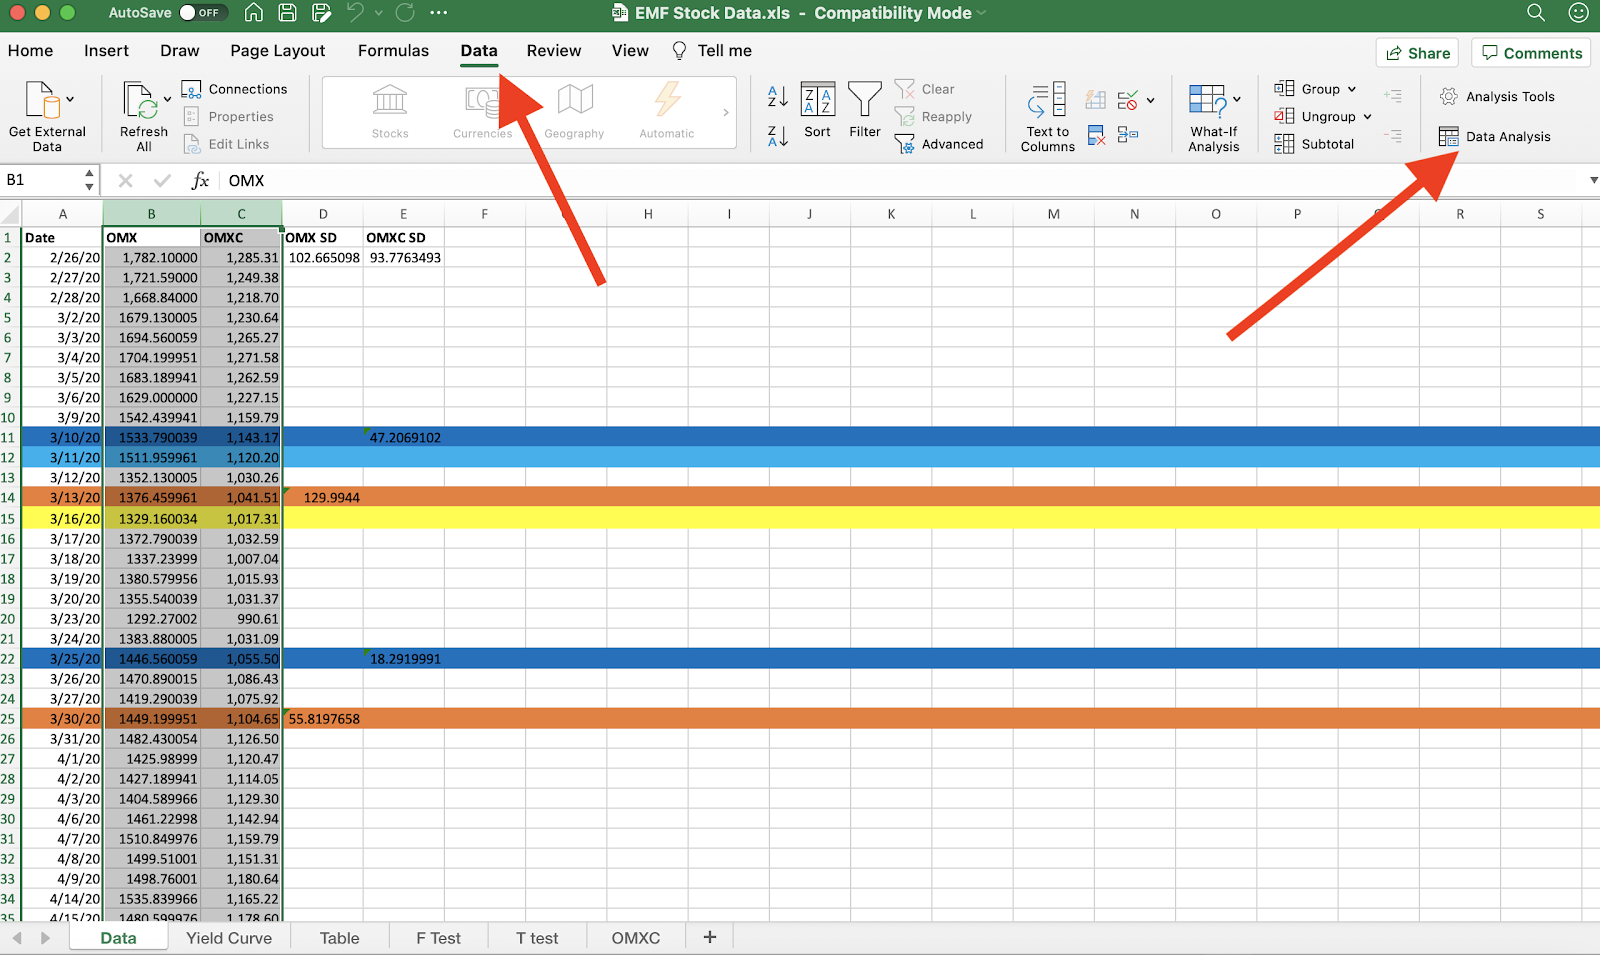 How to run an F-Test in Excel using data from the OMX and OMXC indices